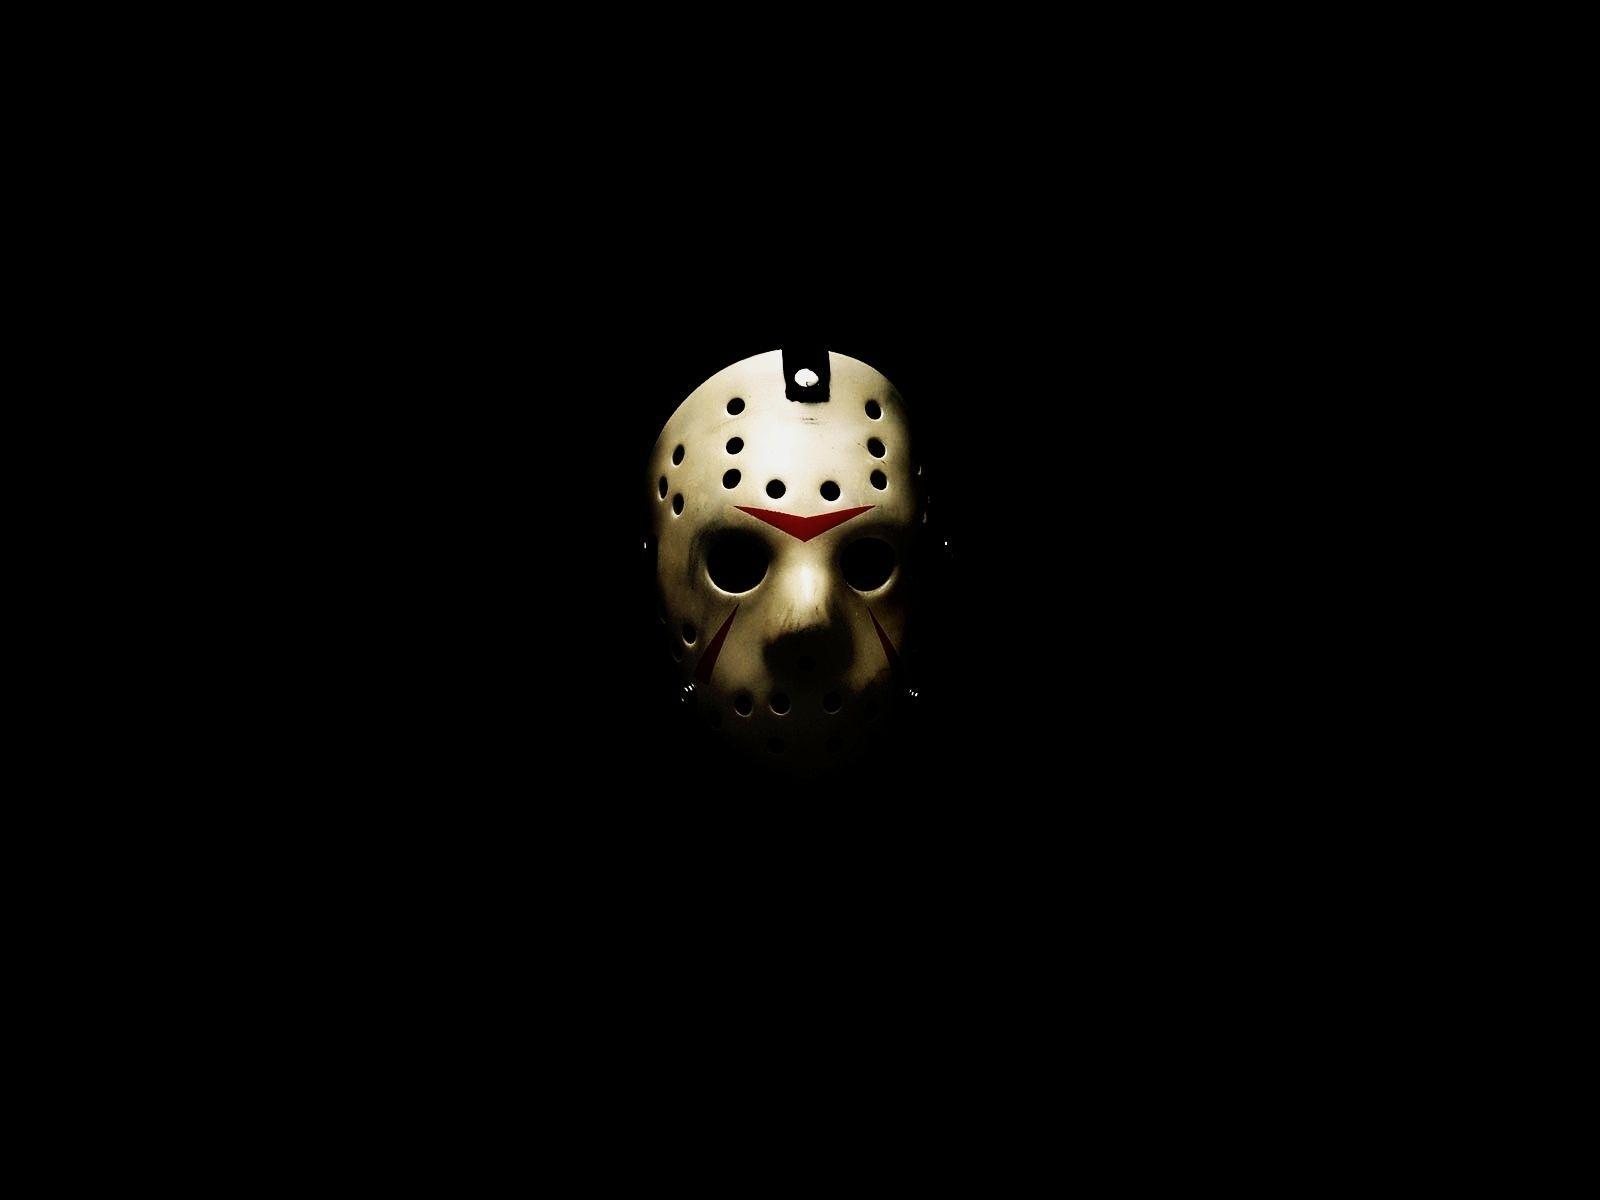 Wallpaper Hd Android Jason Voorhees